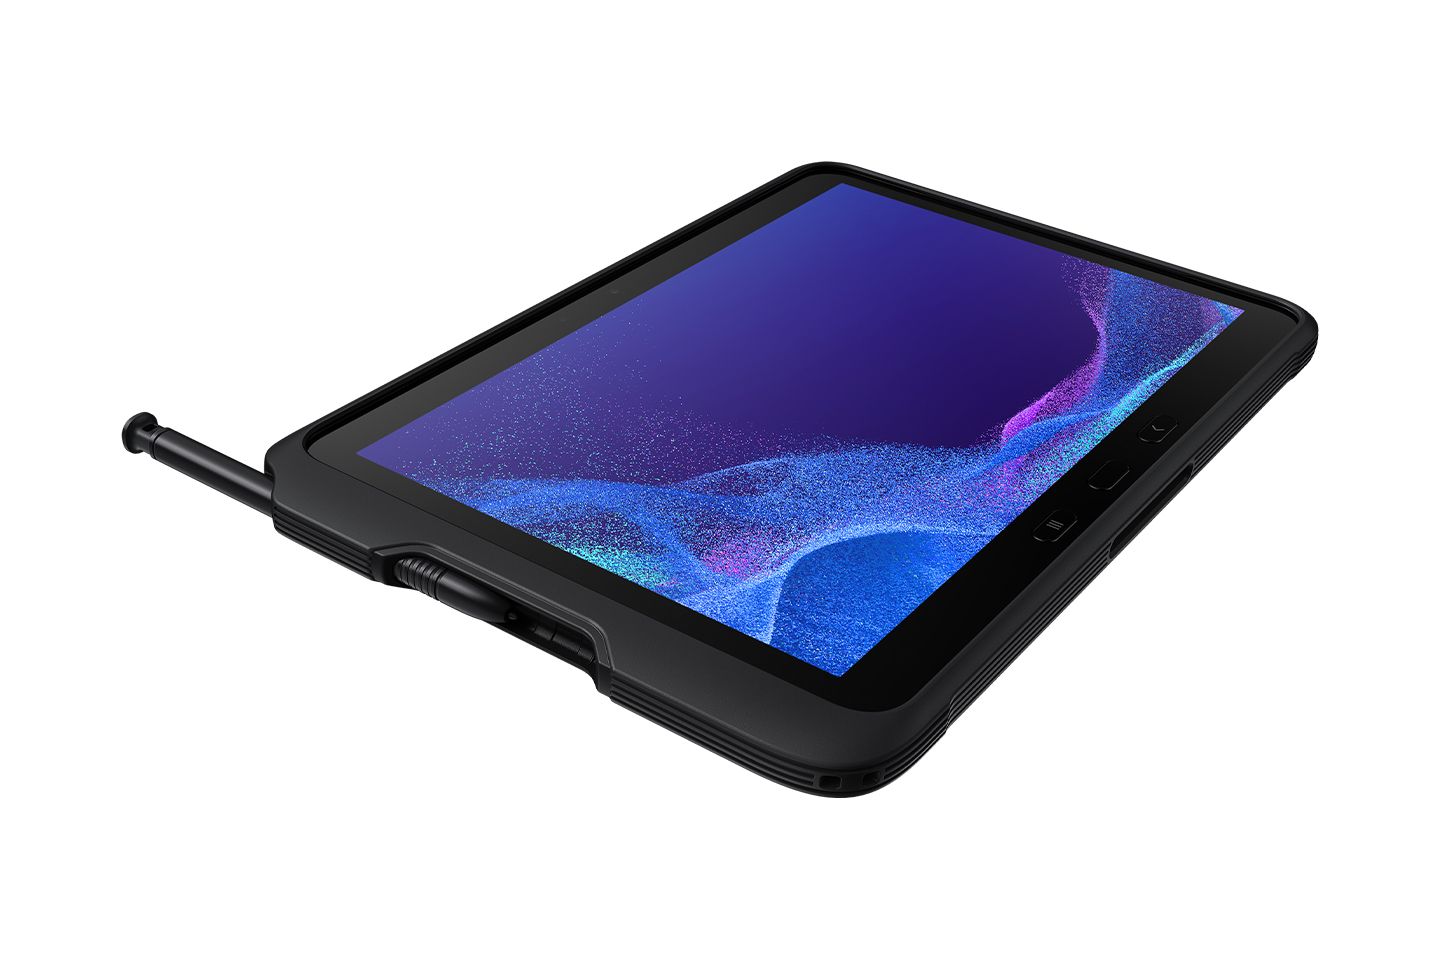 Samsung Galaxy Tab Active 4 Pro official: robust 10-inch tablet with S Pen